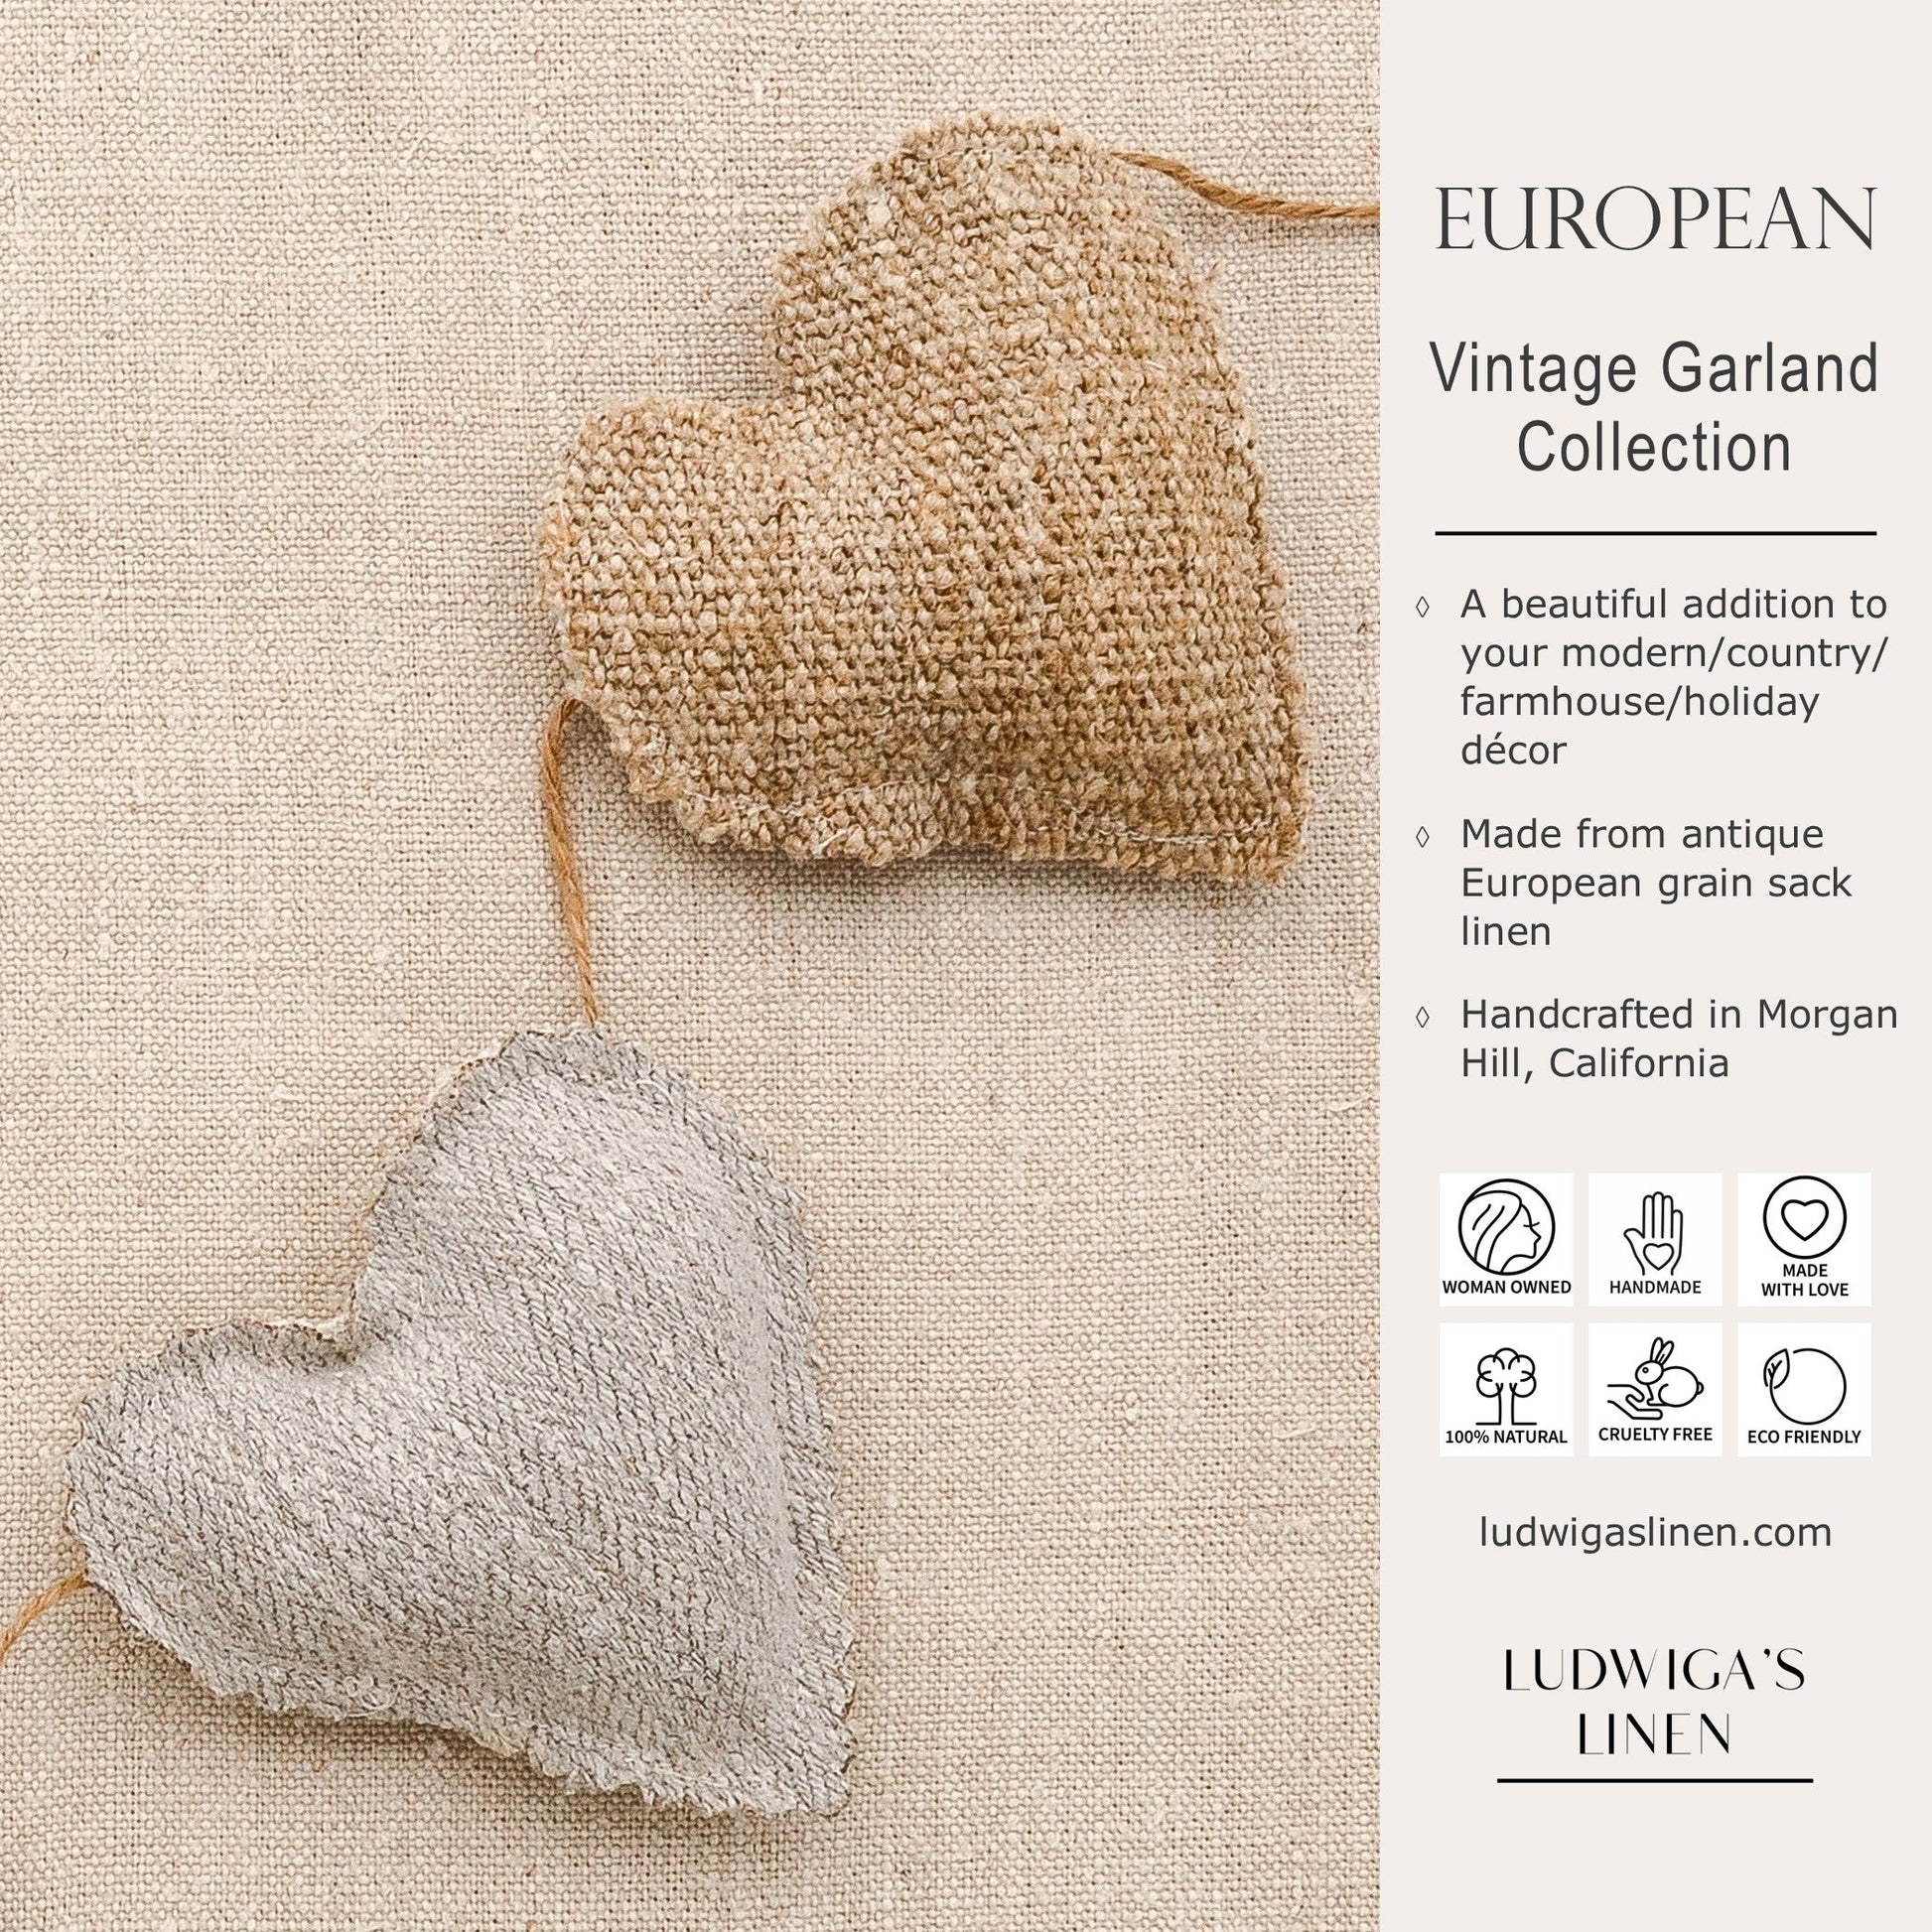 Focus on two hearts in this vintage European grain linern sack garland on white cotton or hemp twine